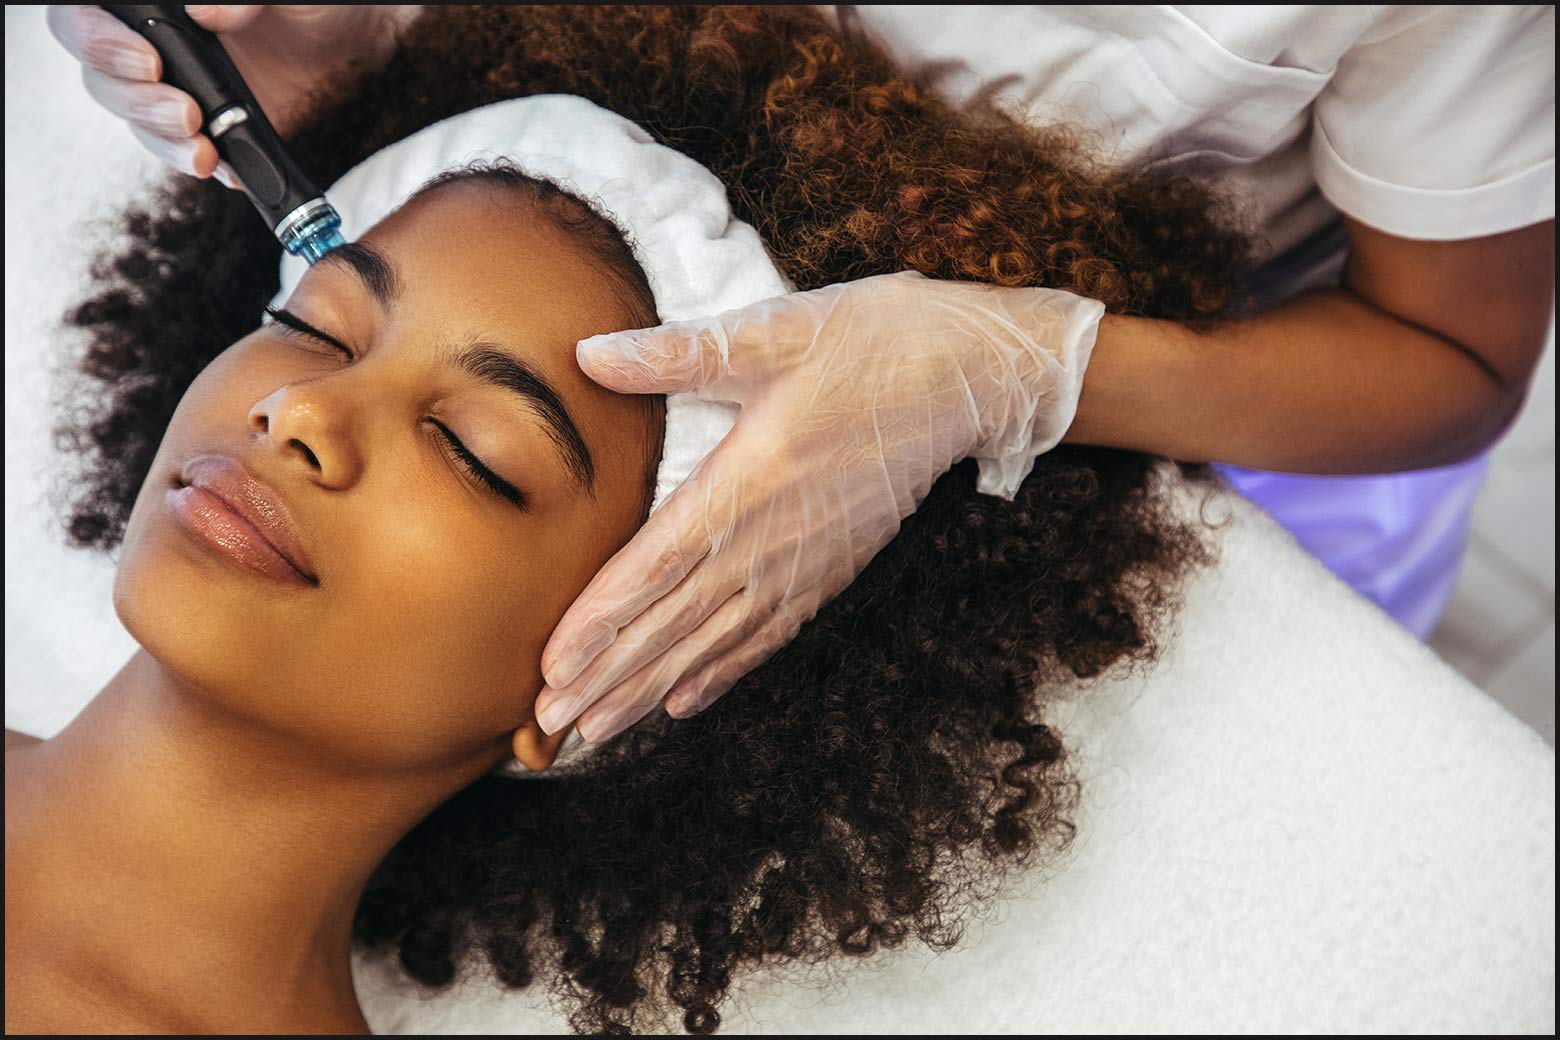 close up of person’s face with eyes closed and natural hair pulled back, getting a microdermabrasion facial, gloved hand is holding one side of their face